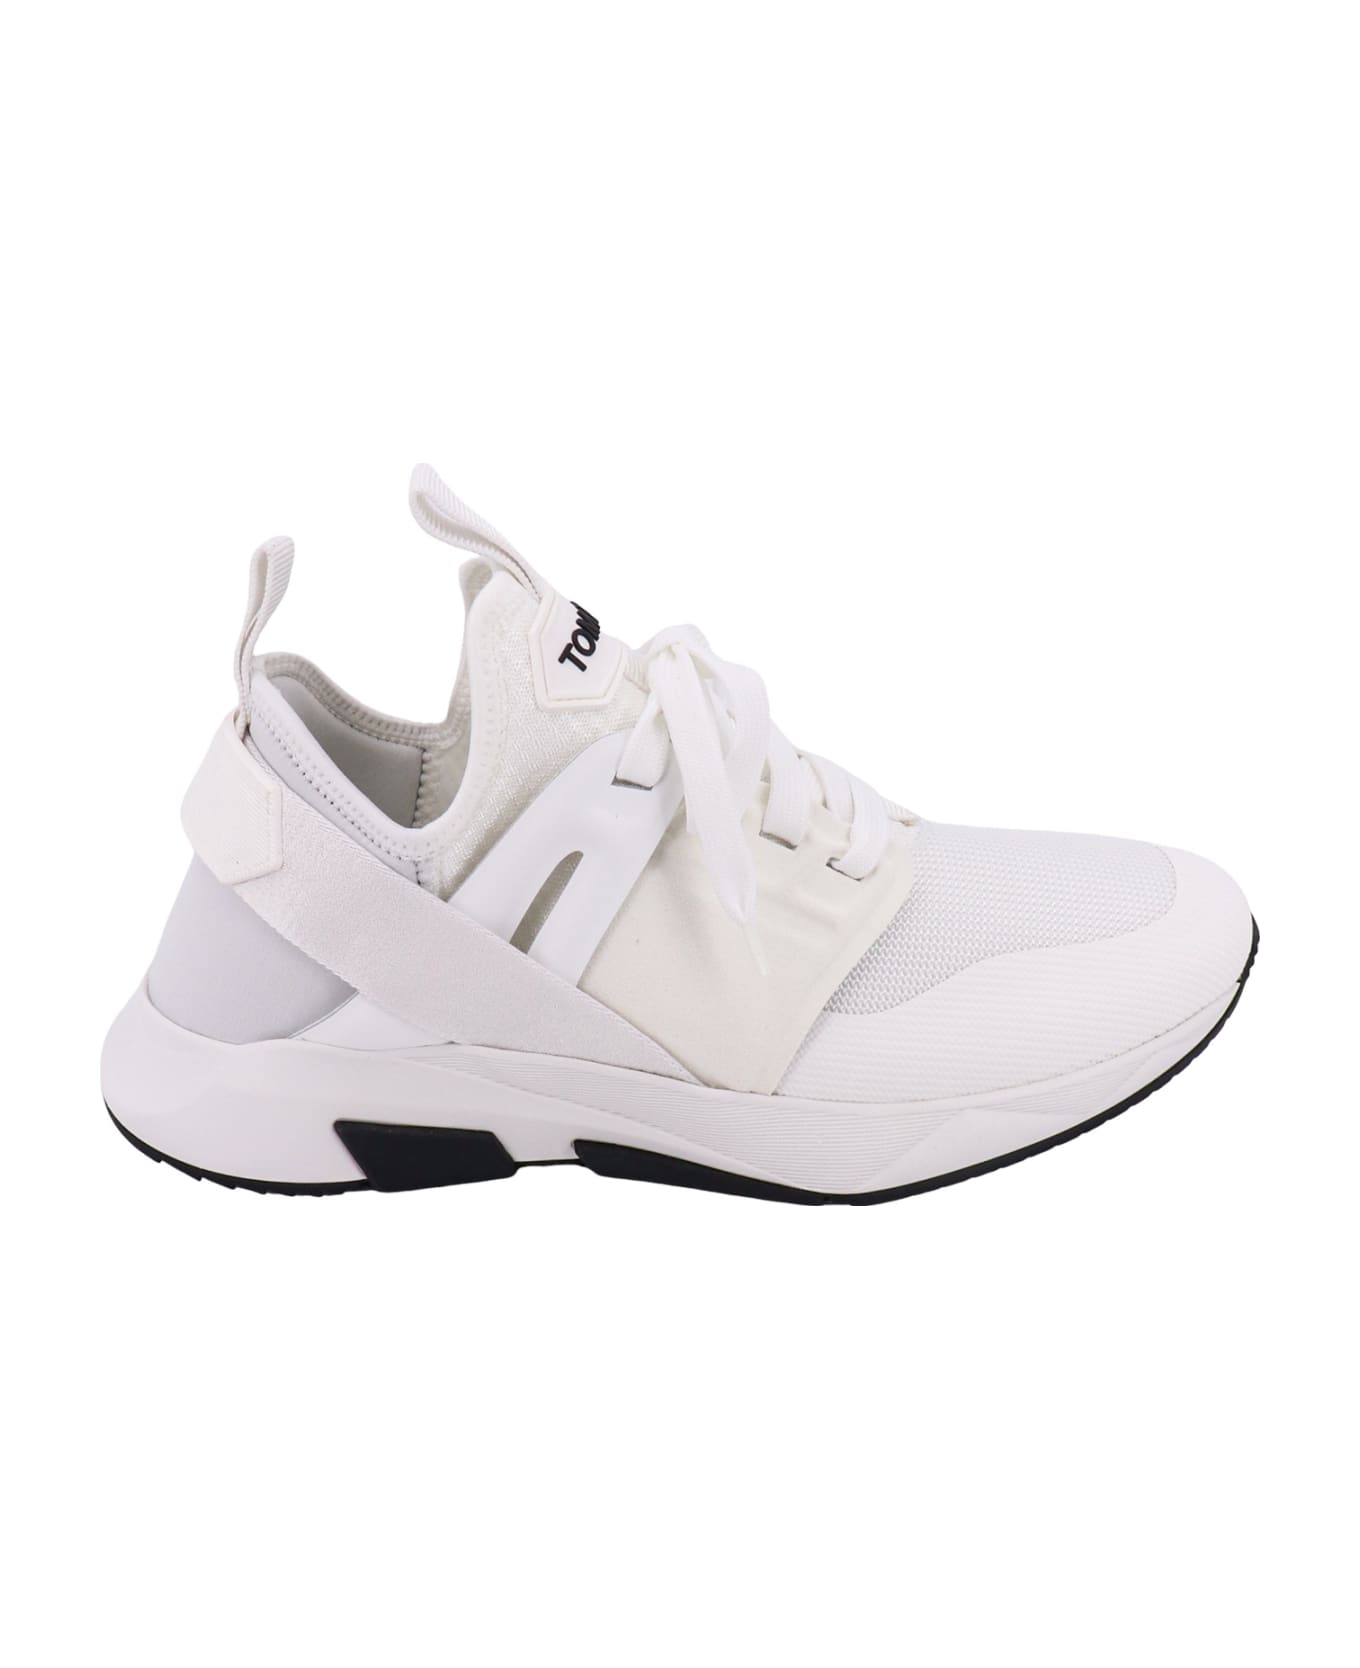 Tom Ford Jago Sneakers - White